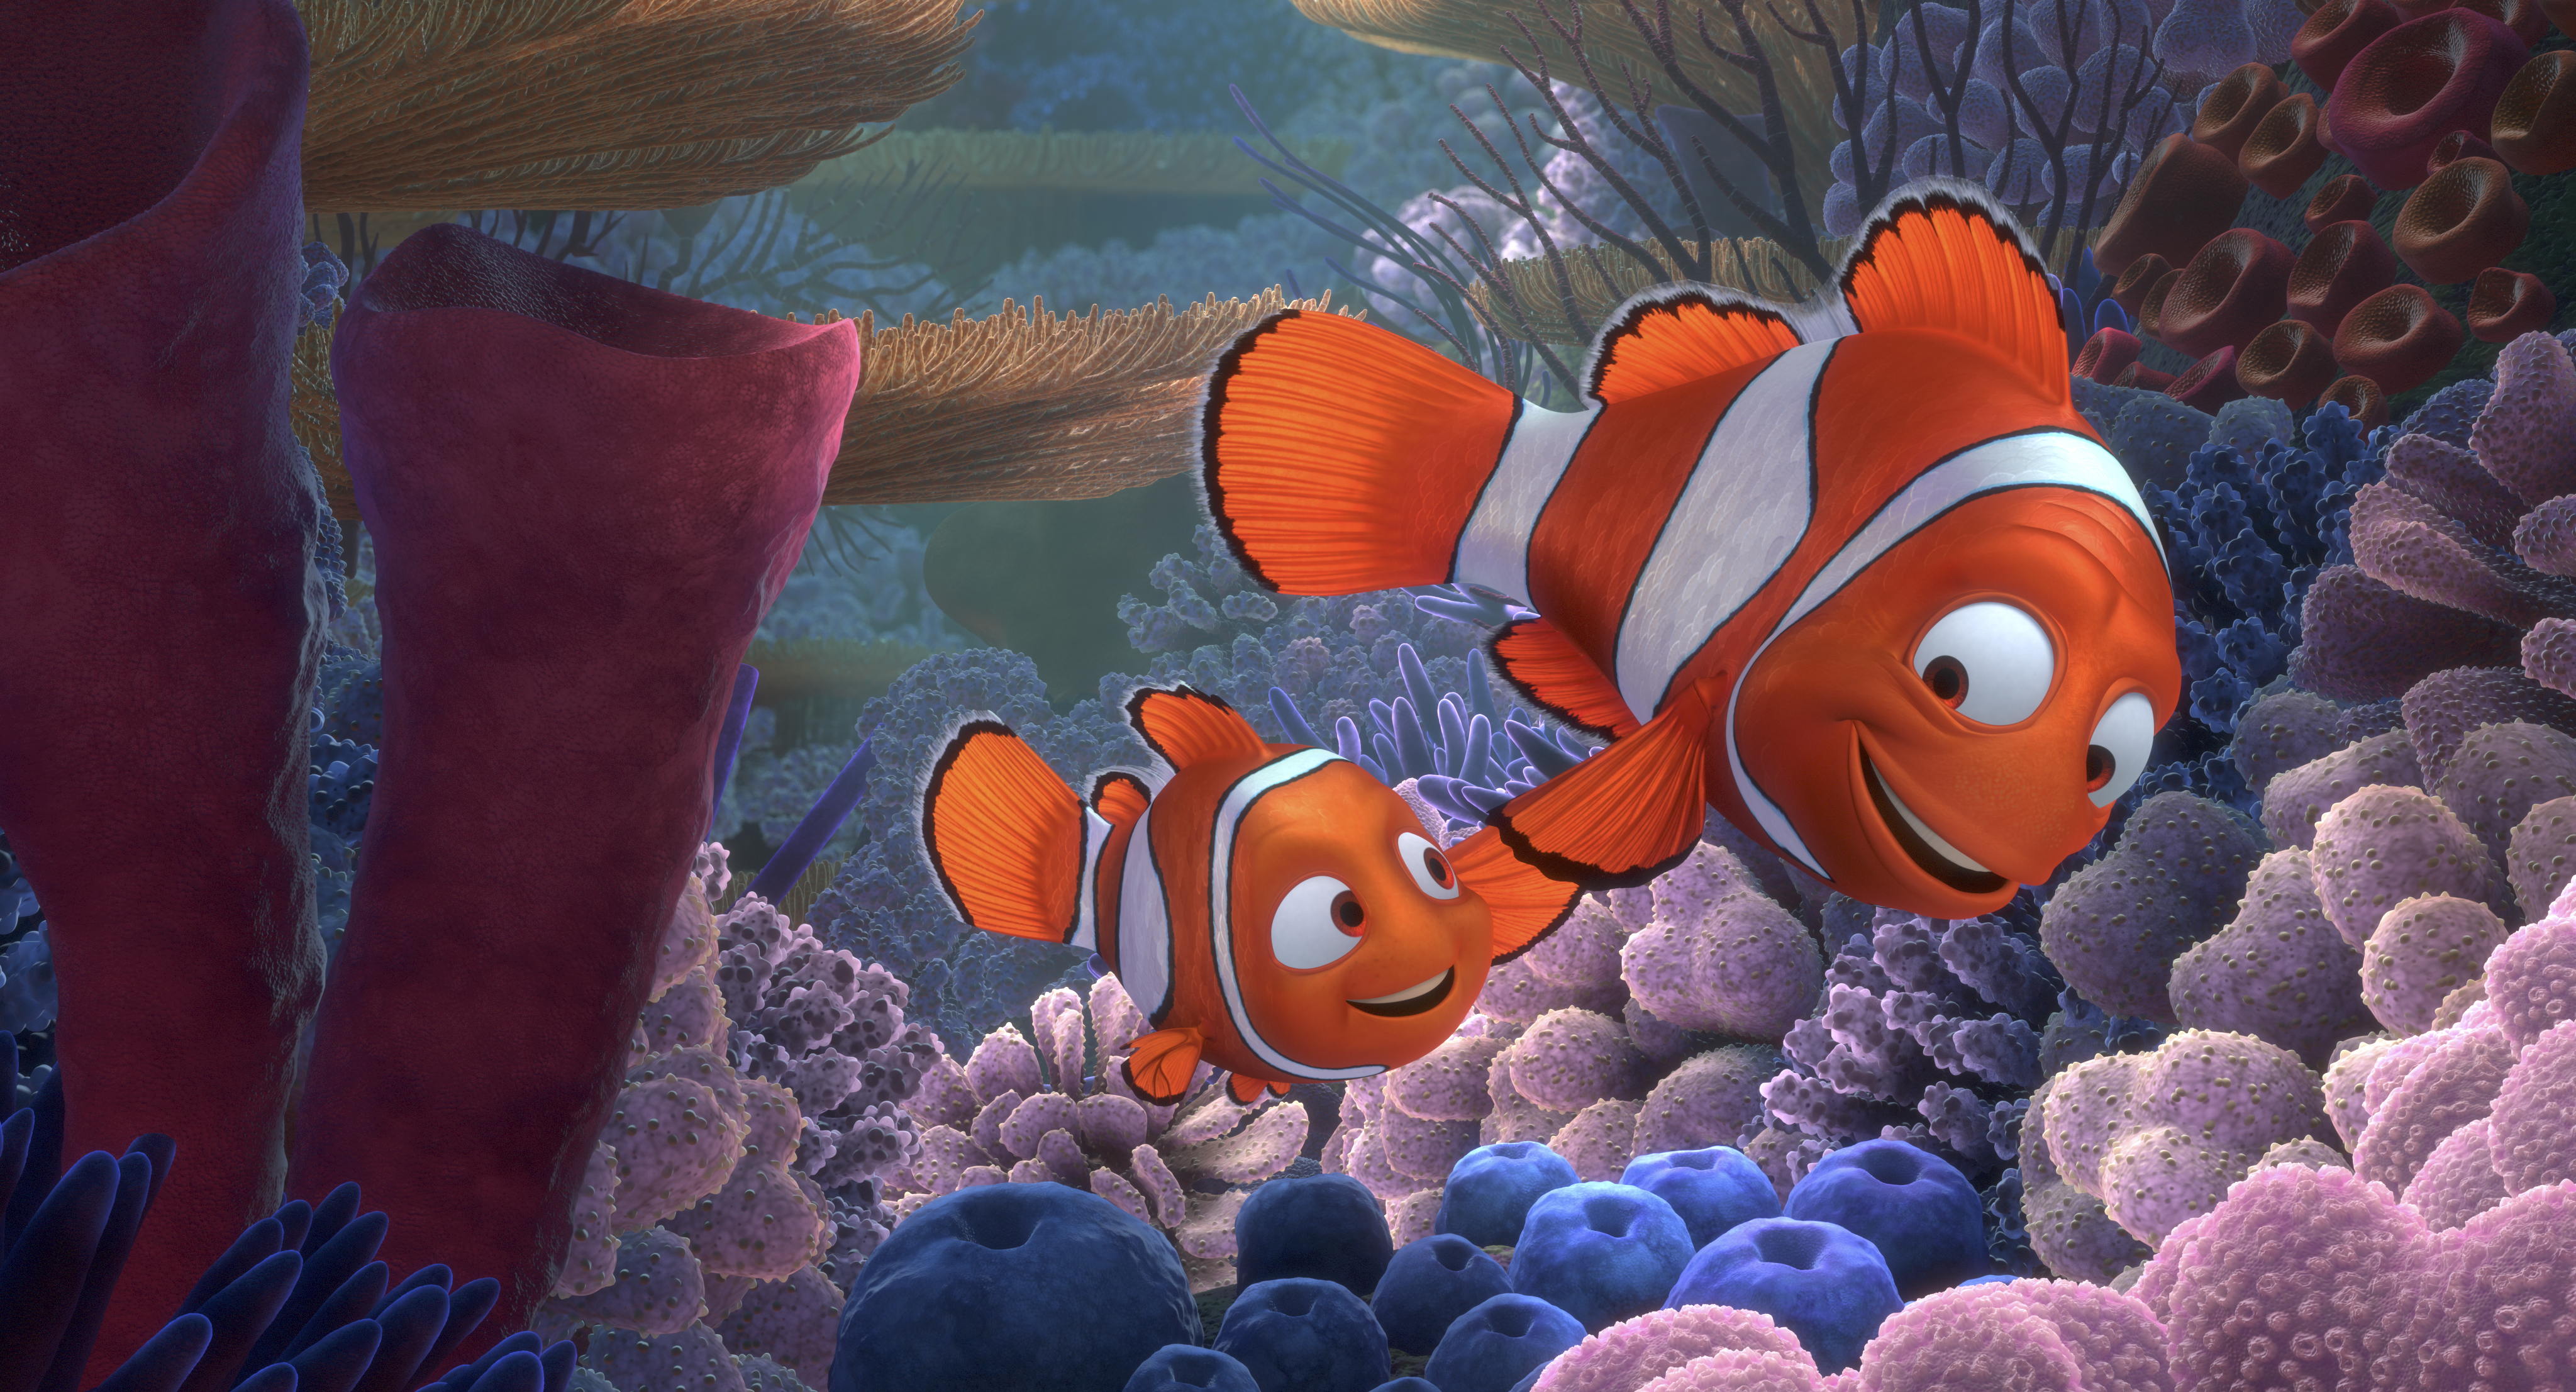 "FINDING NEMO 3D" (L-R) NEMO and MARLIN. ©2012 Disney/Pixar. All Rights Reserved.